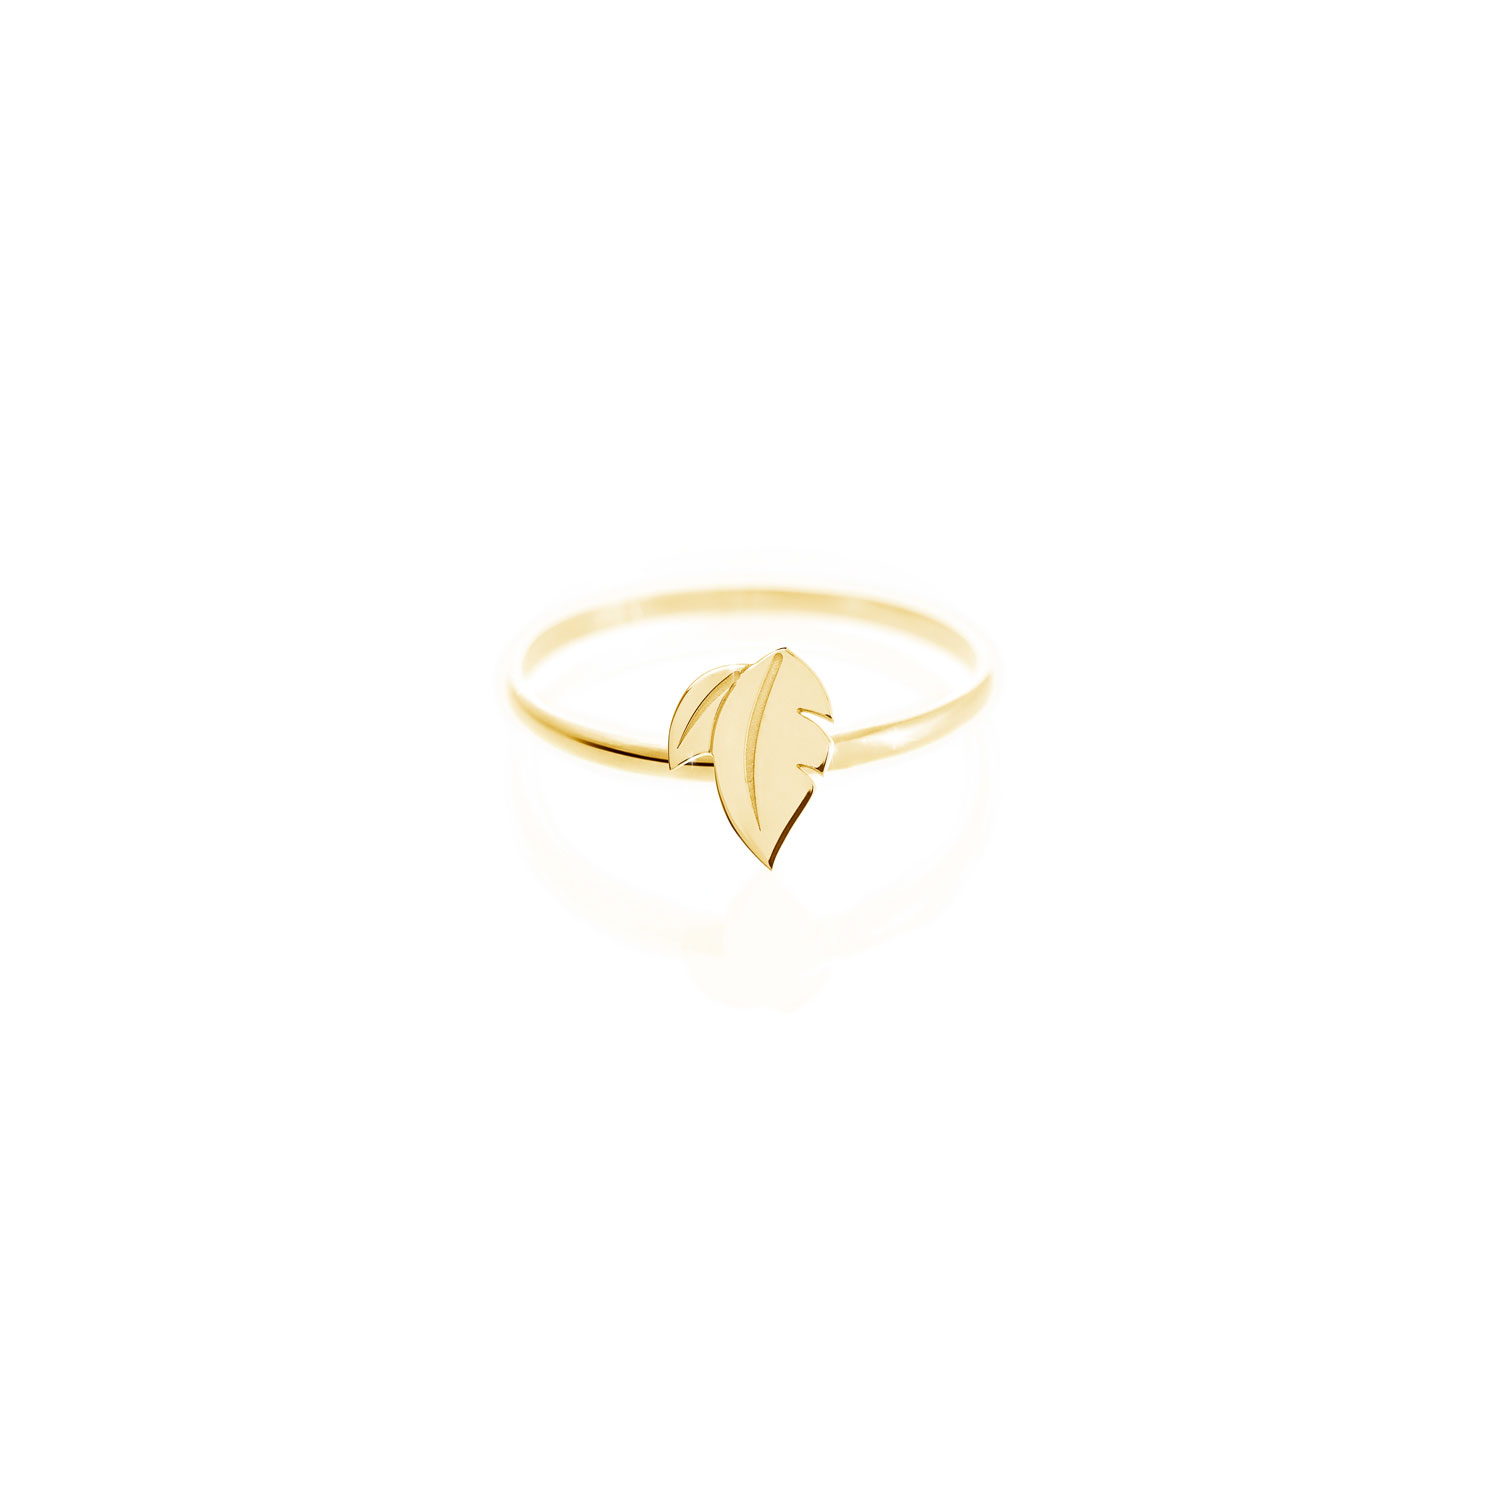 Amazon.com: GLOQUAT 18K Gold Plated Open Ring Adjustable Chunky Leaf  Stackable Rings Fashion Vintage Leaf Cubic Zirconia Knuckle Diamond Gold  Rings for Women Girls Cocktail Jewelry Gift Gold Leaf Ring for Women: